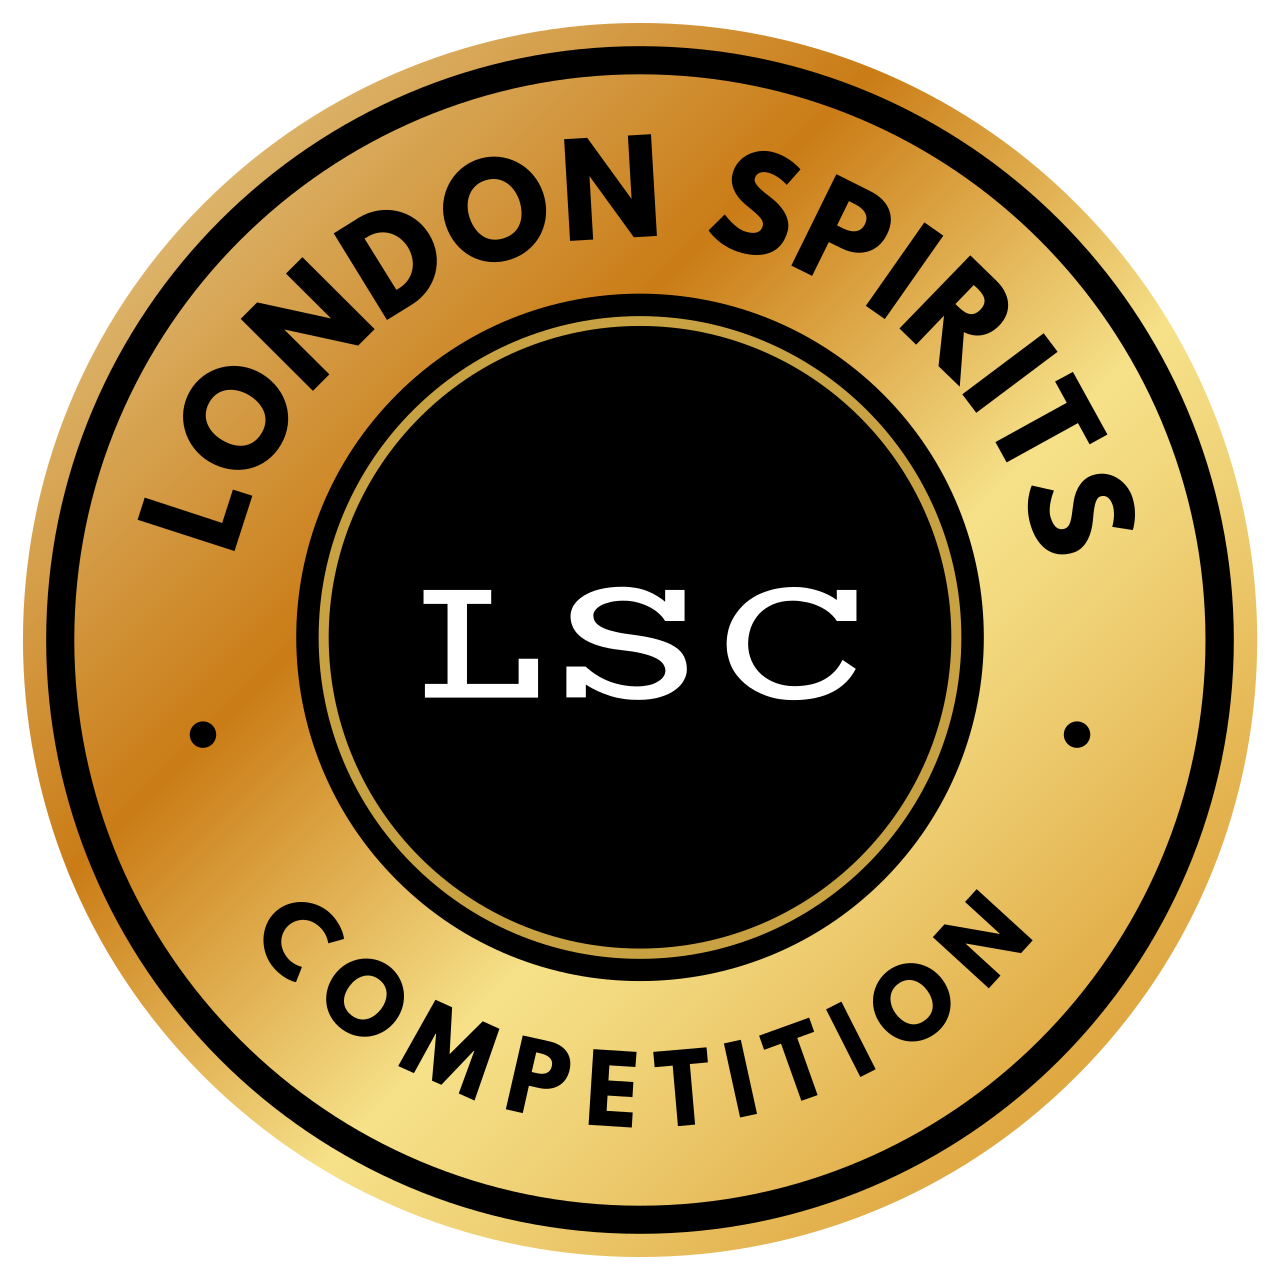 2021 London Spirits Competition